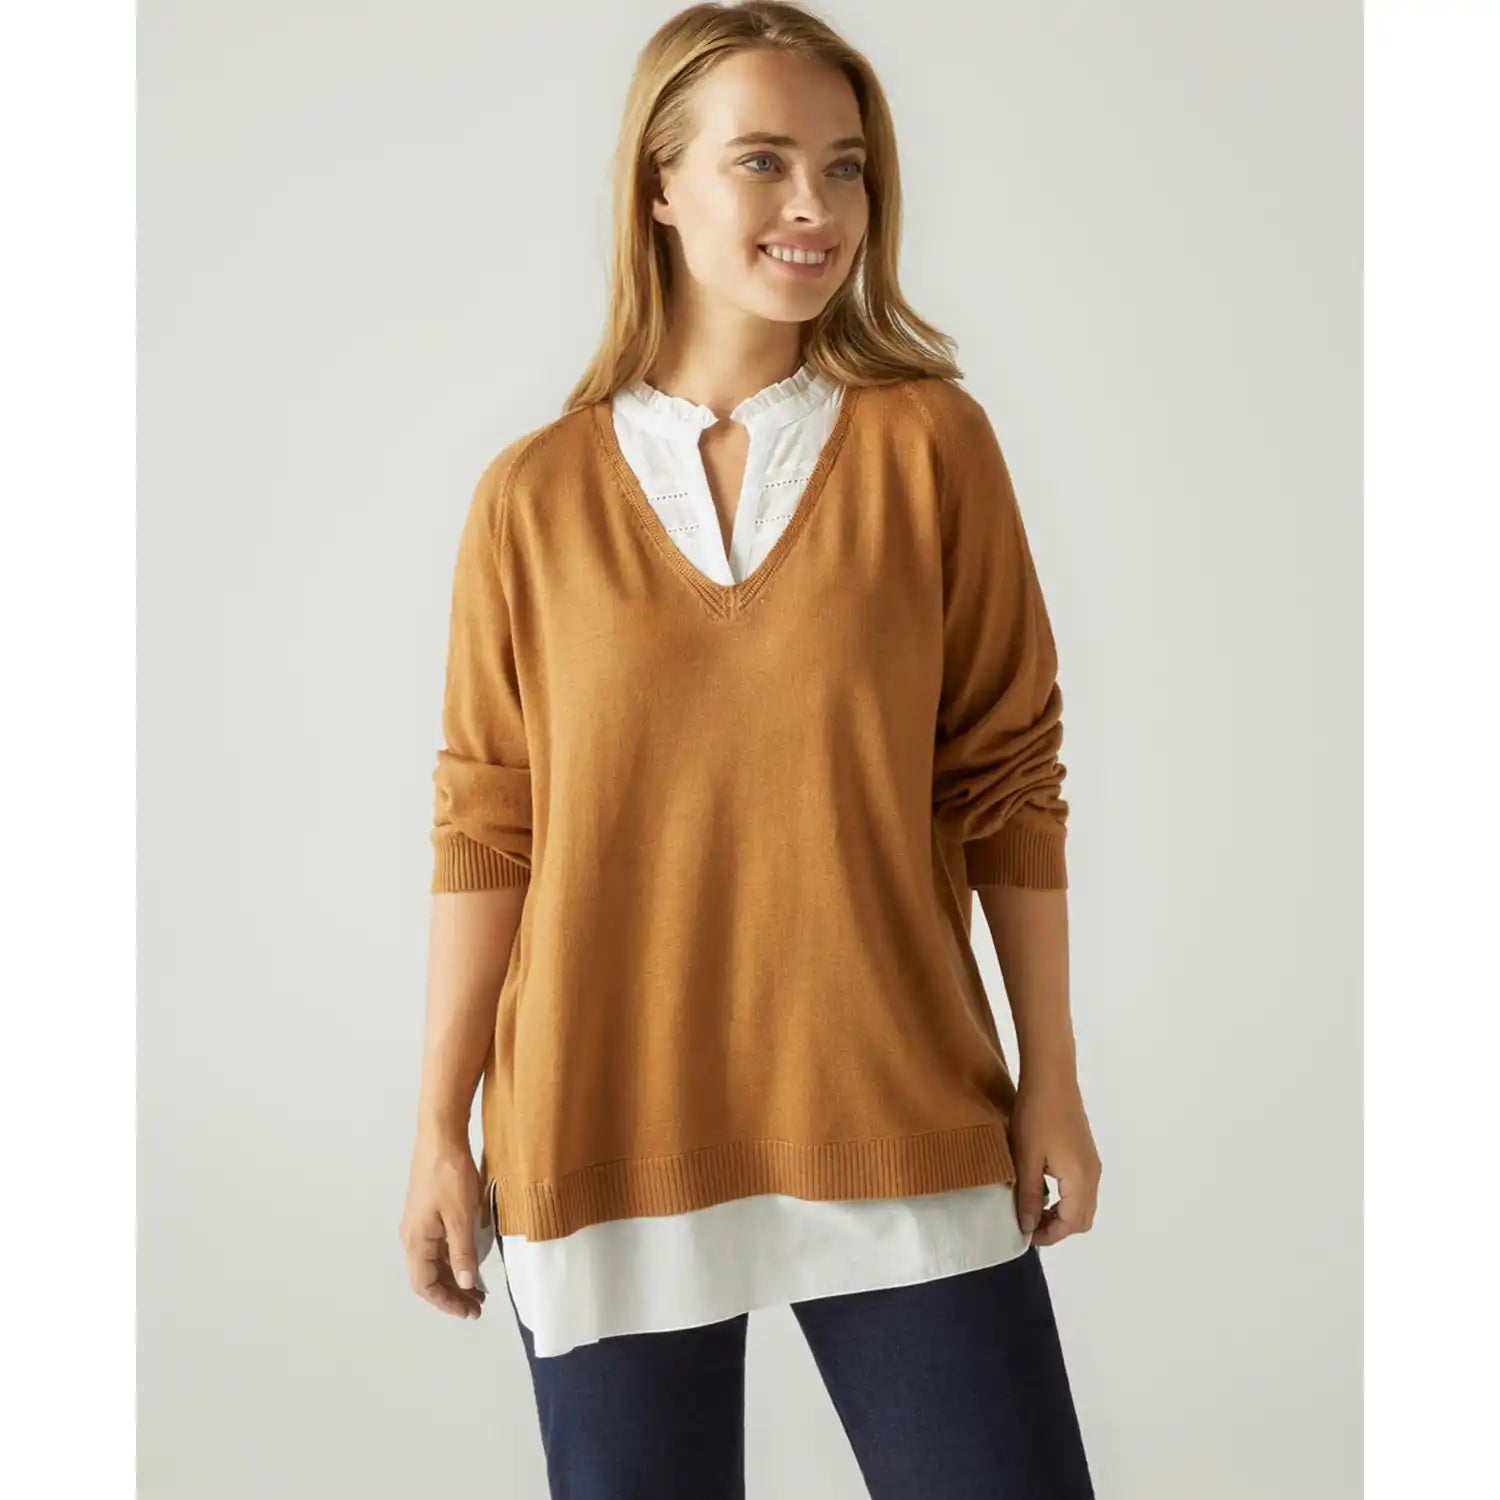 Couchel Sweater with Embroidery - Toffee 1 Shaws Department Stores